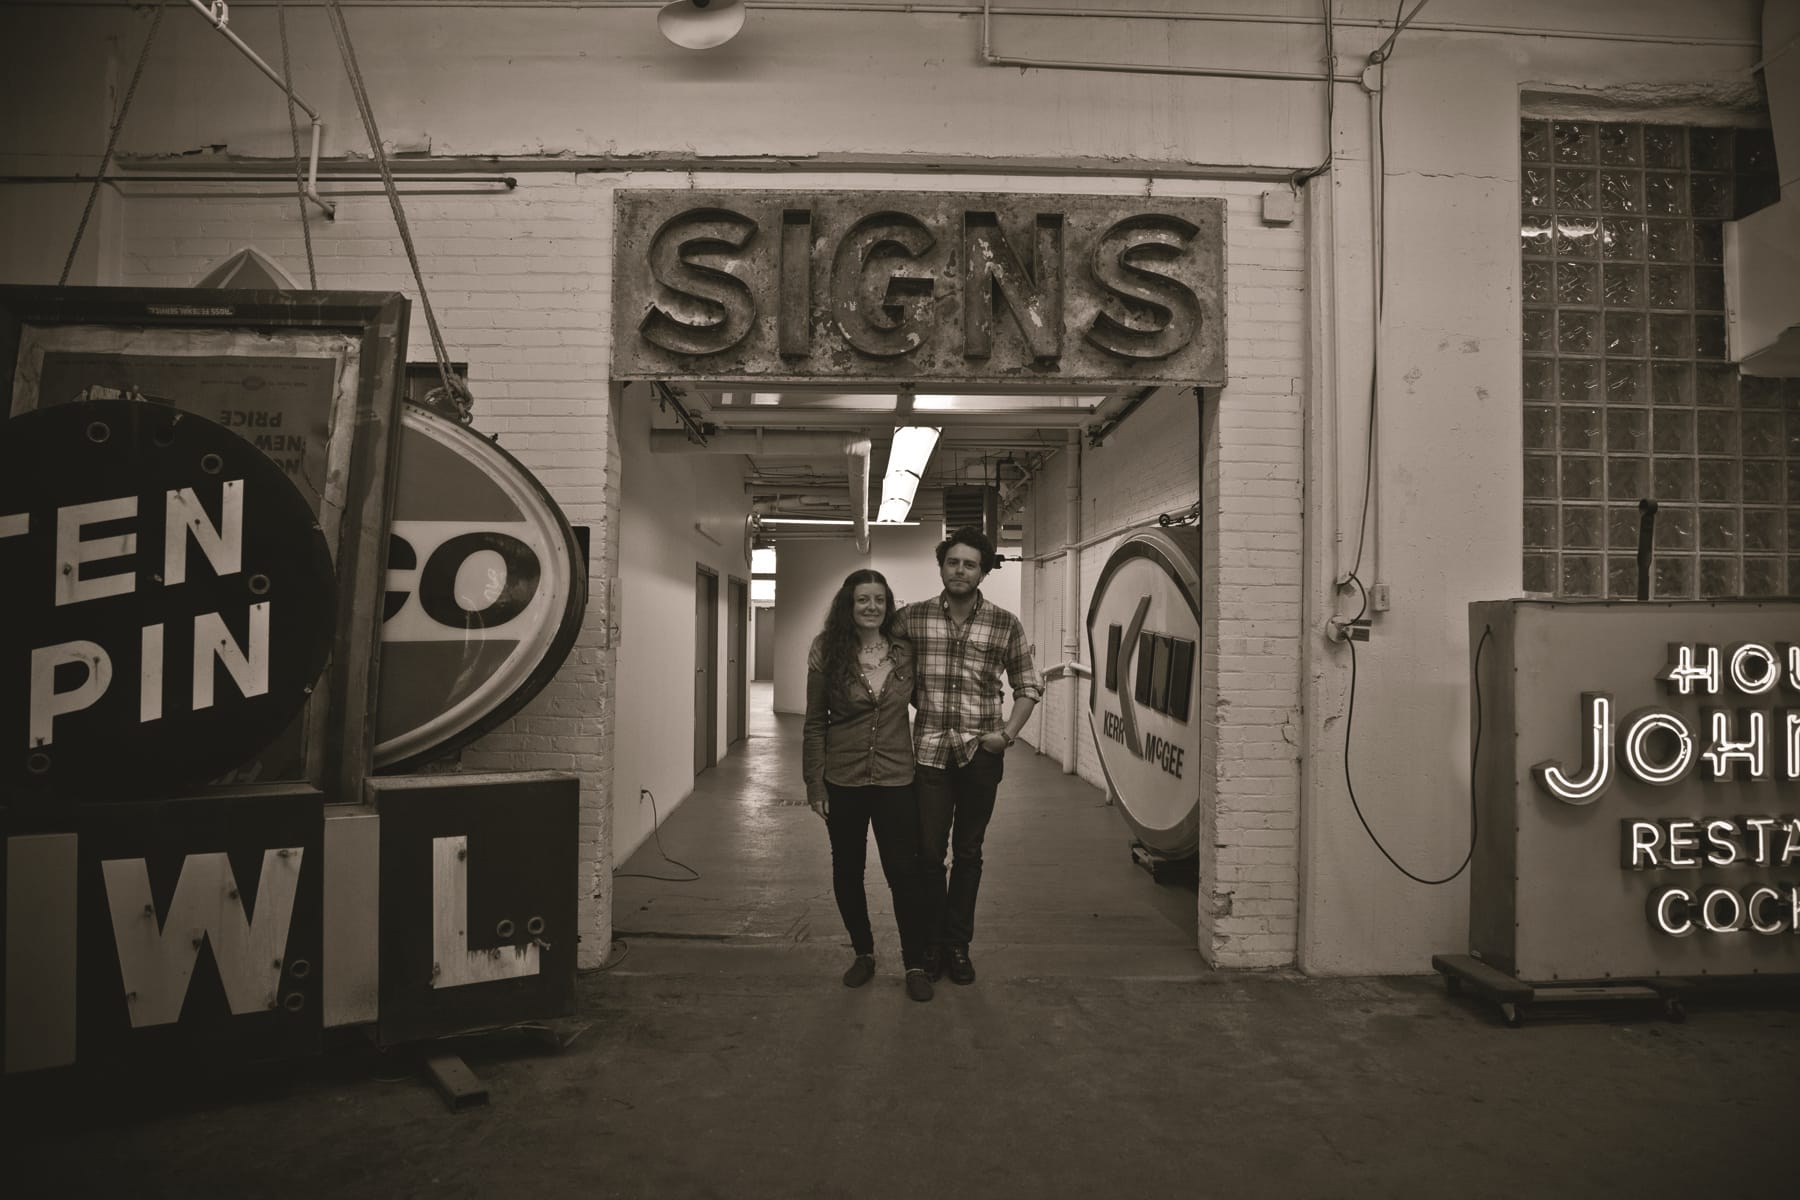 Portrait in a warehouse-style space with various pieces of vintage signage on display.